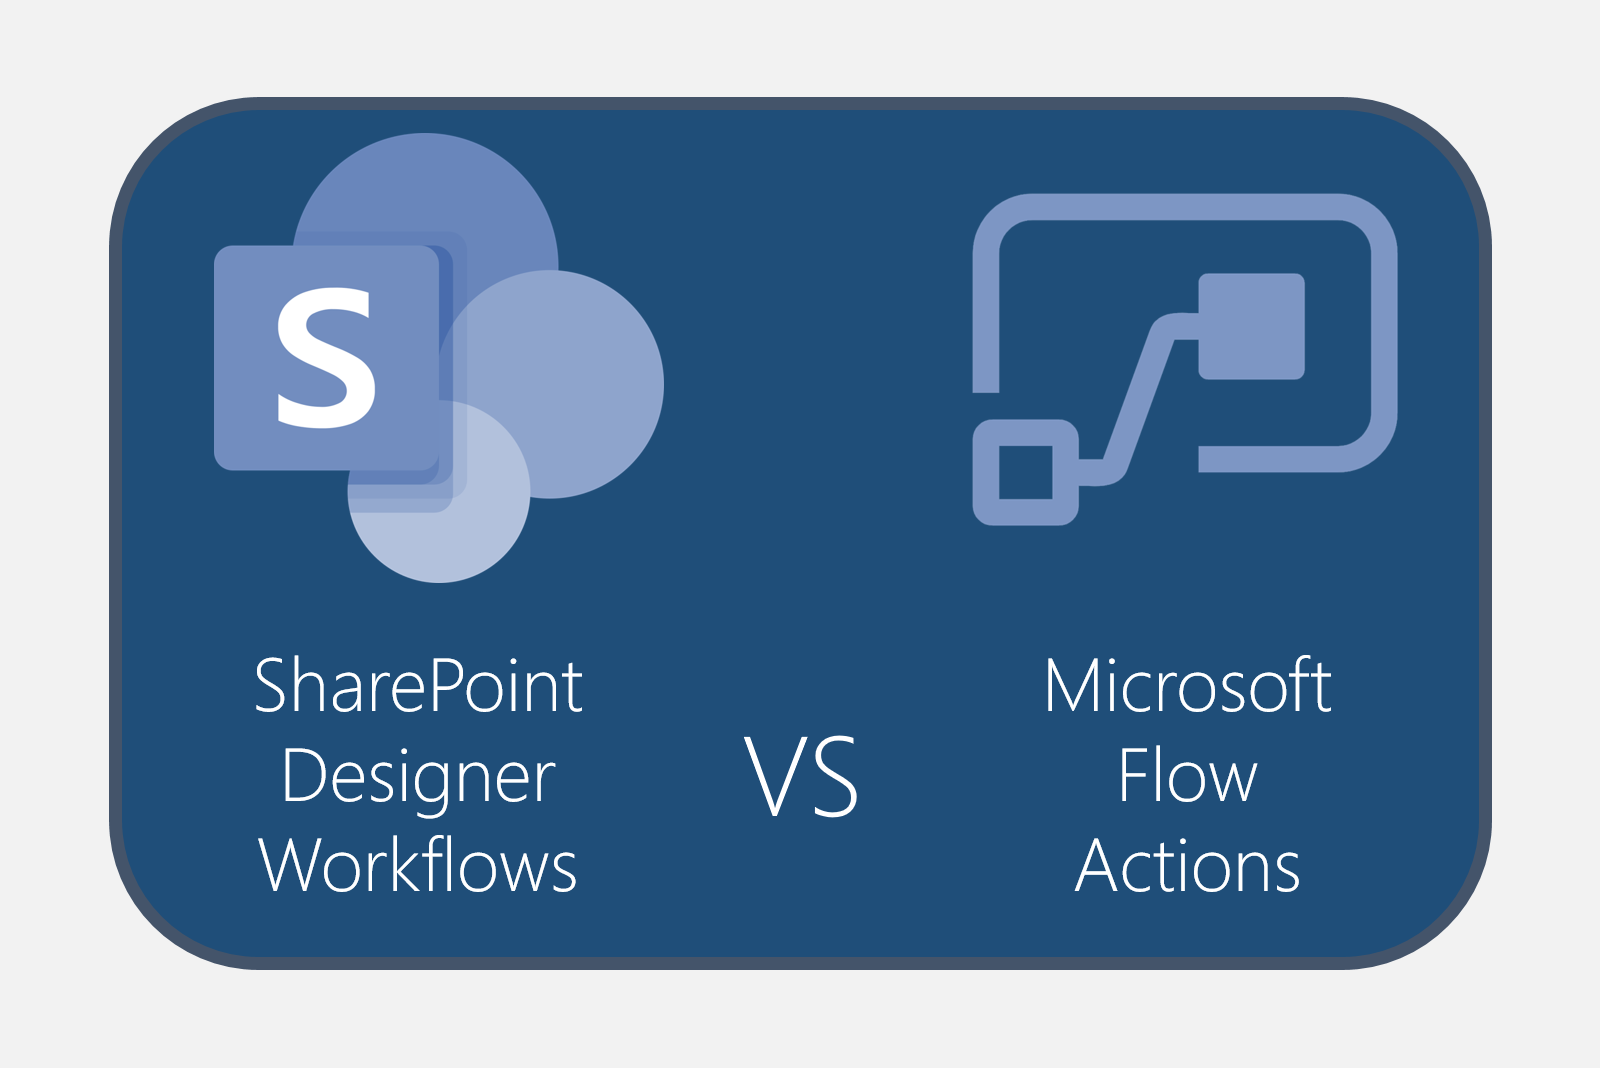 Compare SharePoint Designer Workflows vs Microsoft Flow Actions